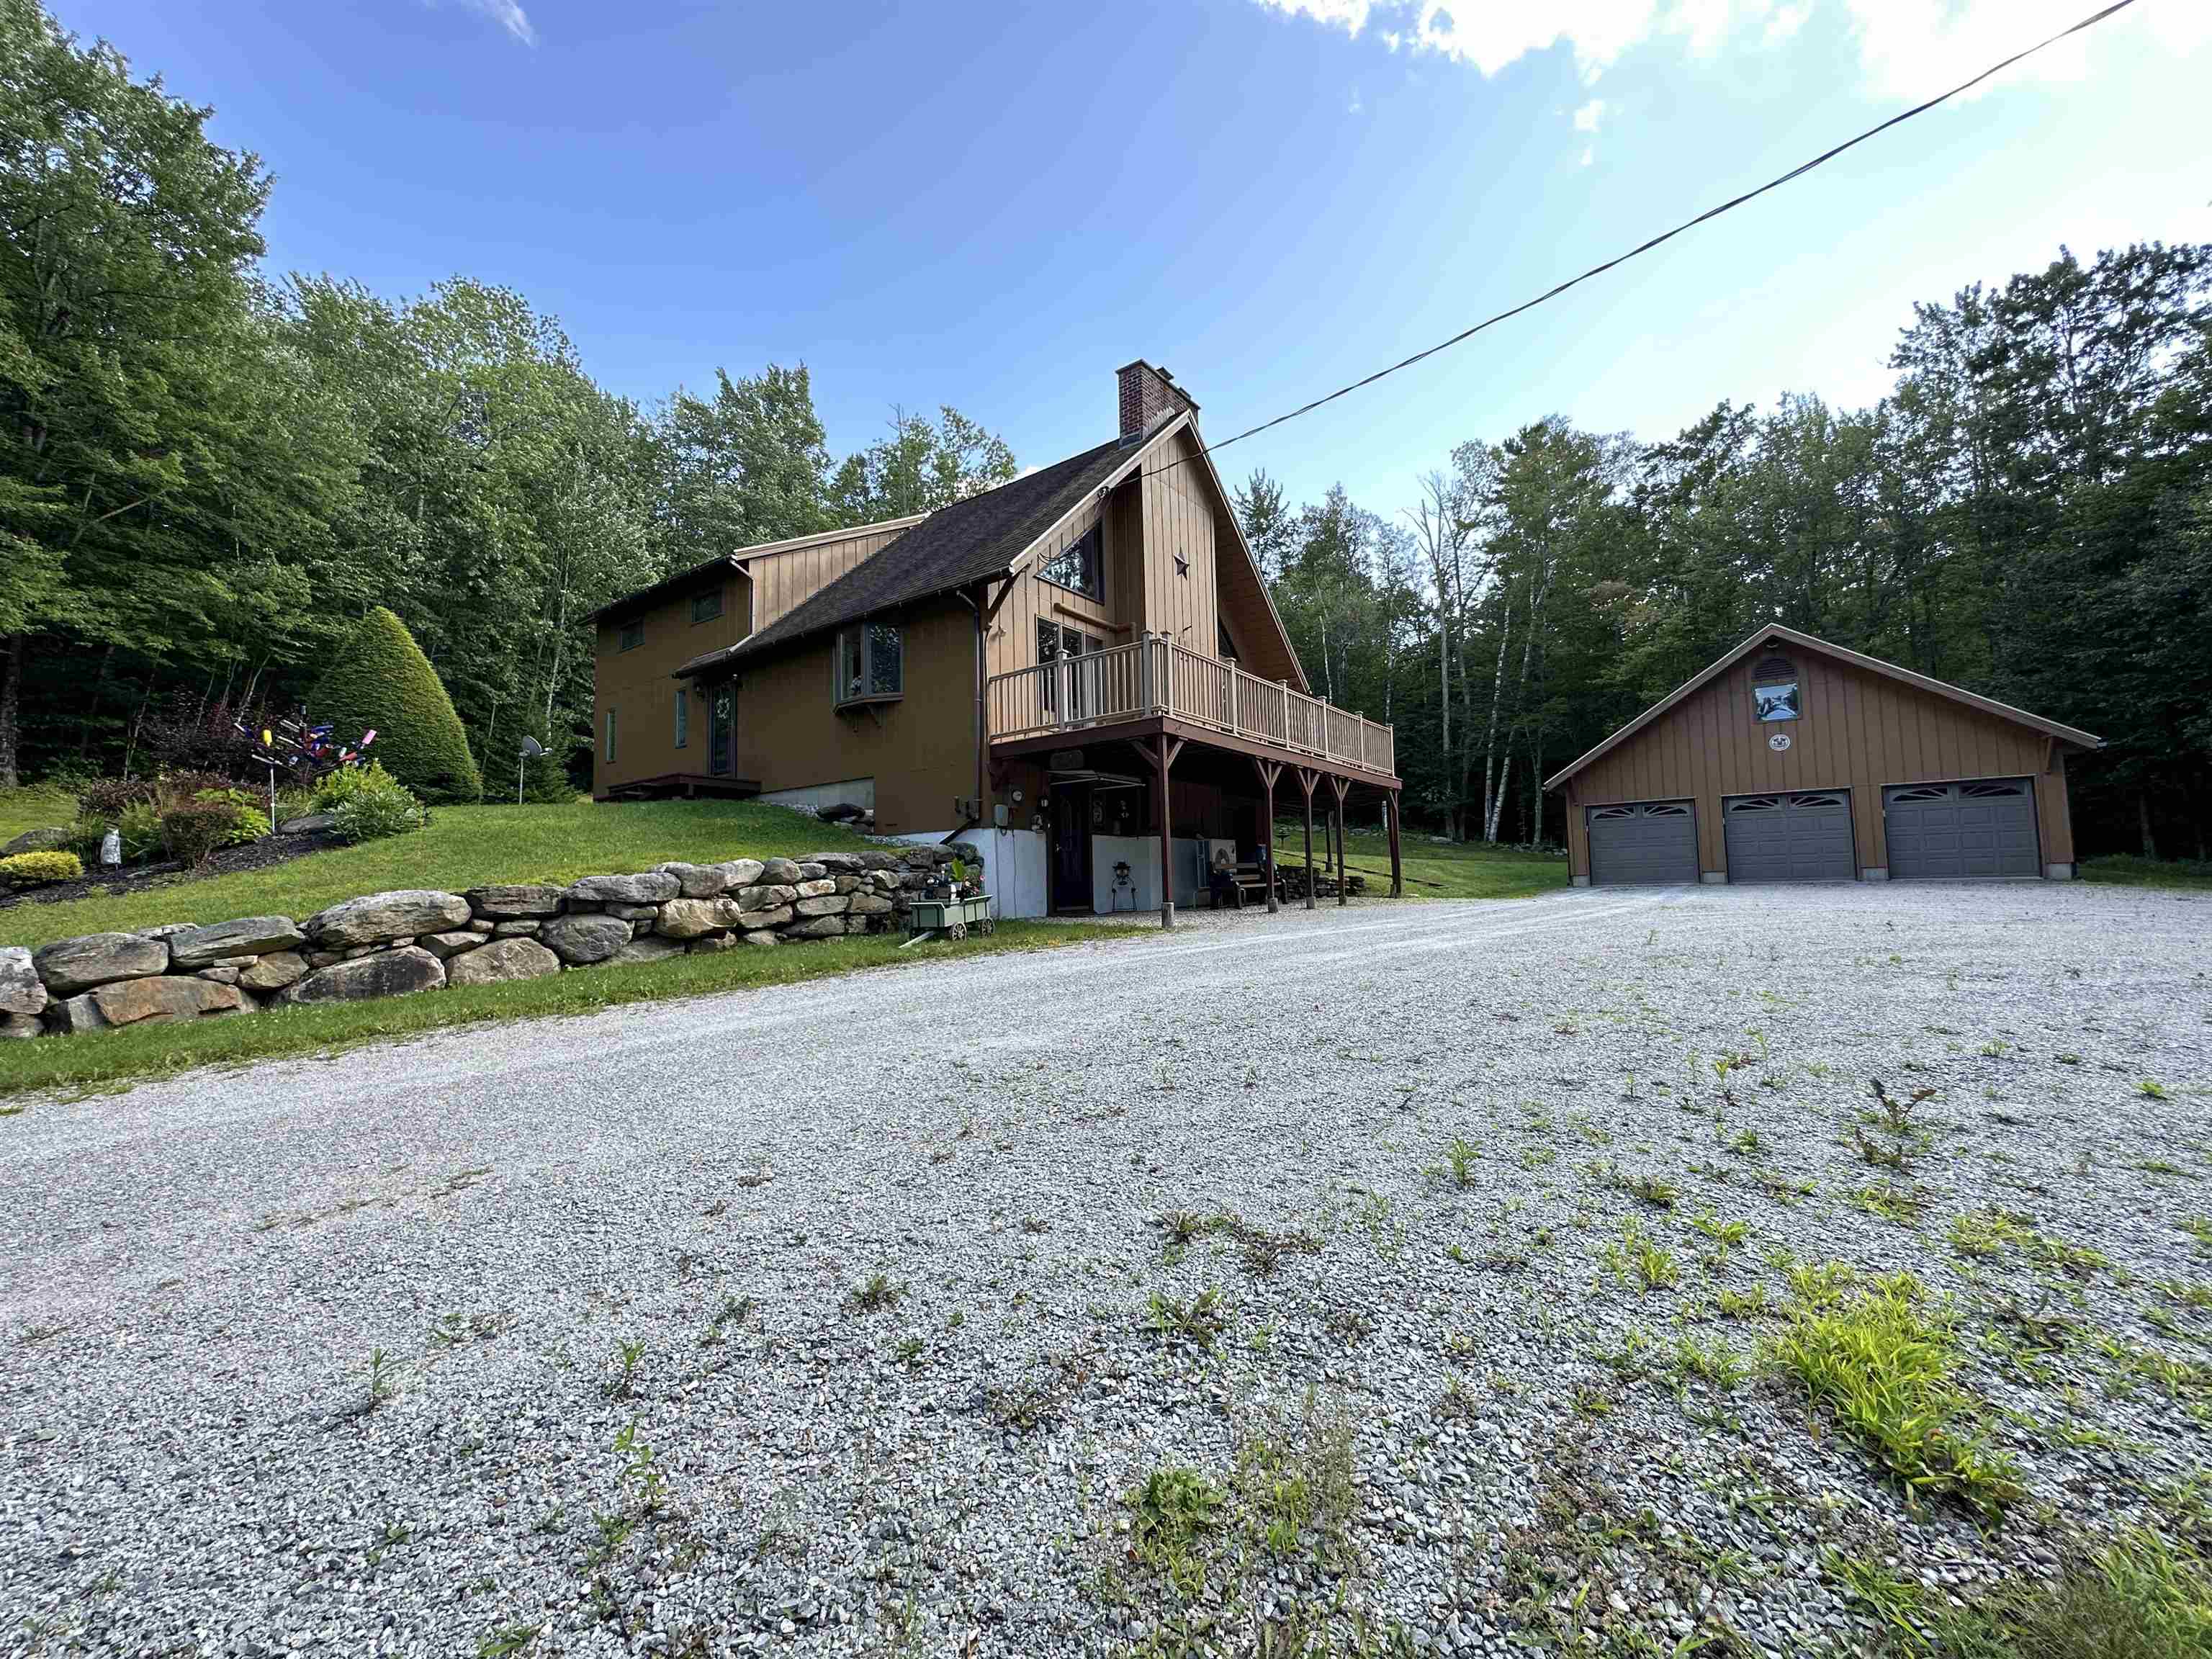 near 1871 Route 103 Mount Holly, VT 05758 Property 2